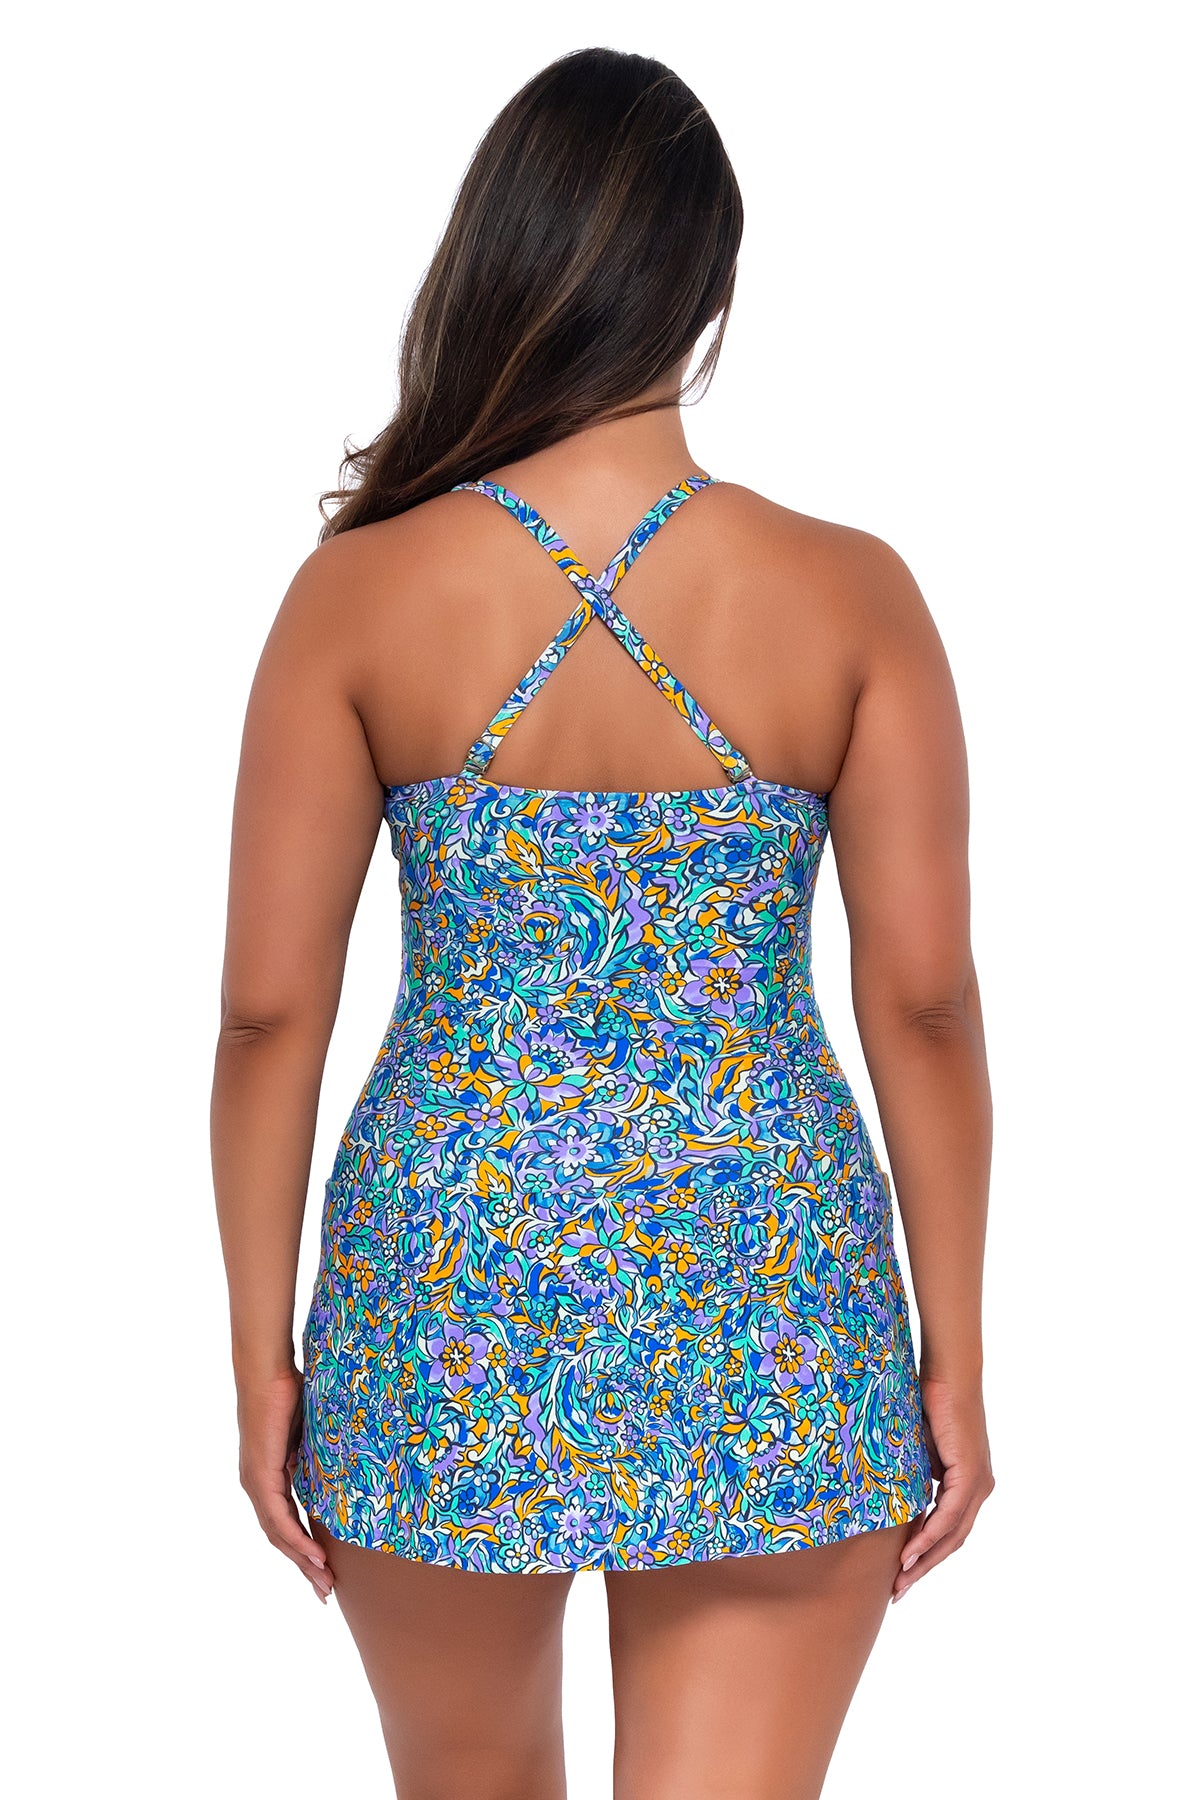 Back pose #1 of Nicky wearing Sunsets Escape Pansy Fields Sienna Swim Dress showing crossback straps